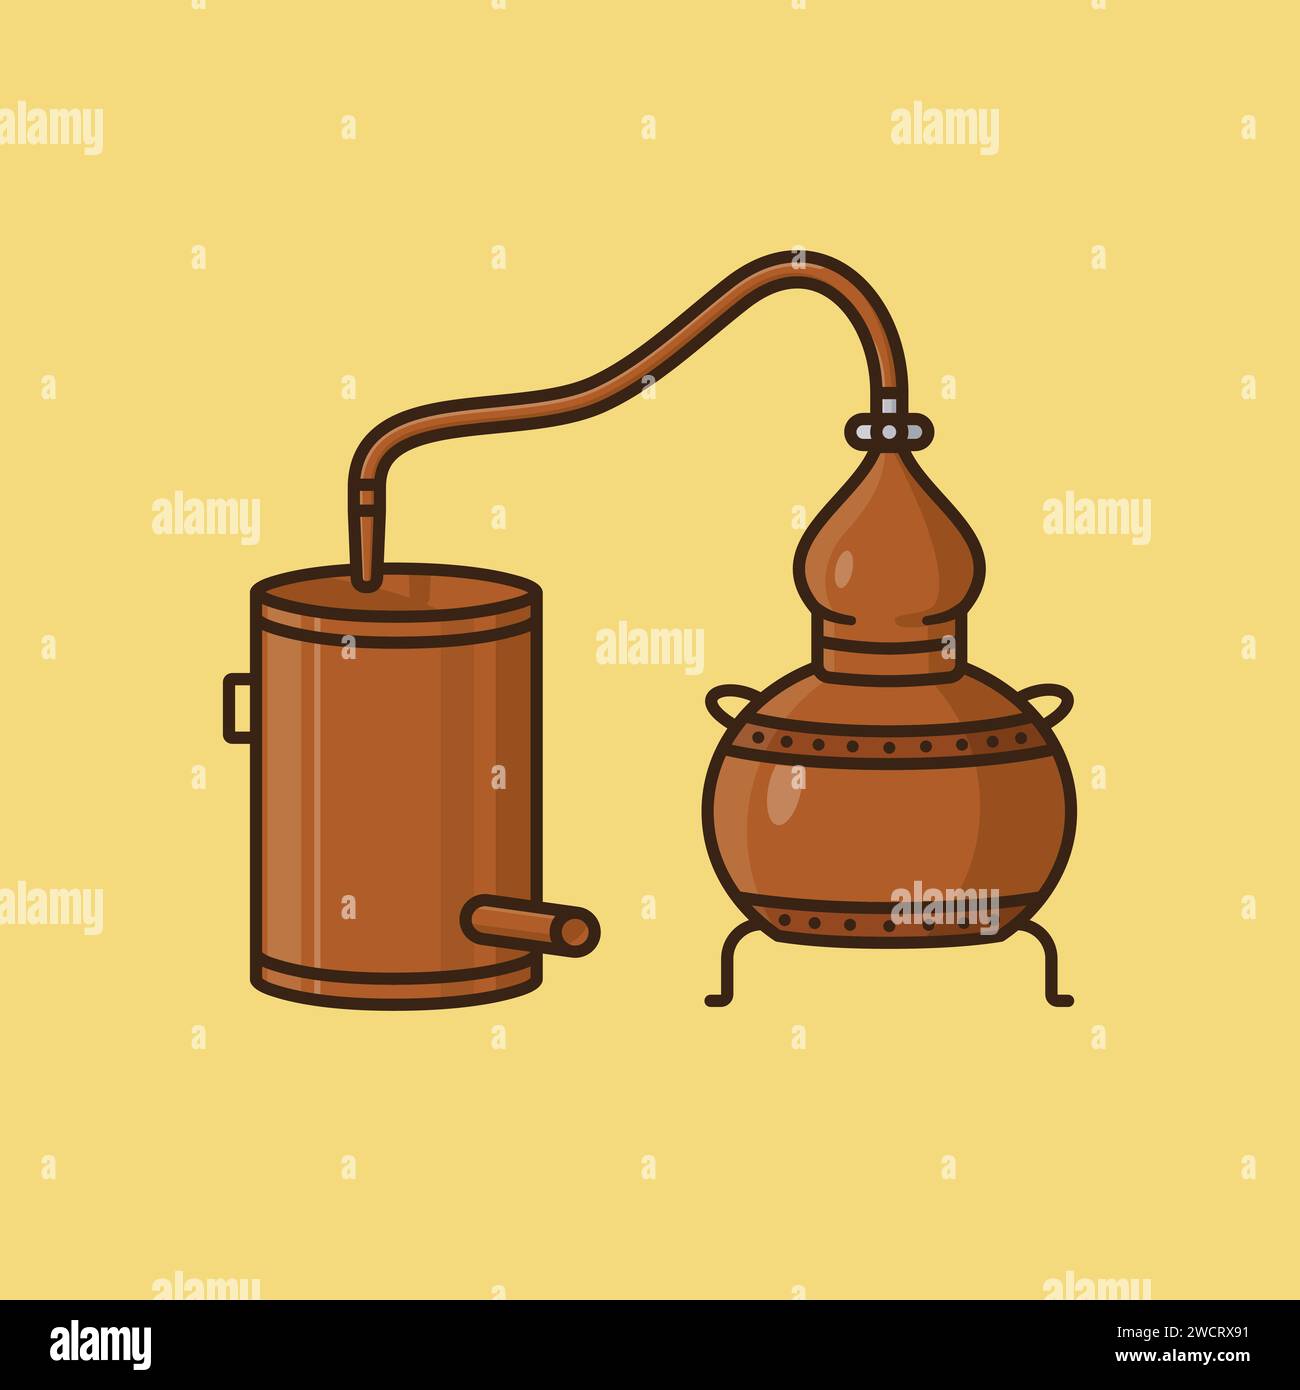 Alembic still vector illustration for Whiskey Day on March 26 Stock Vector